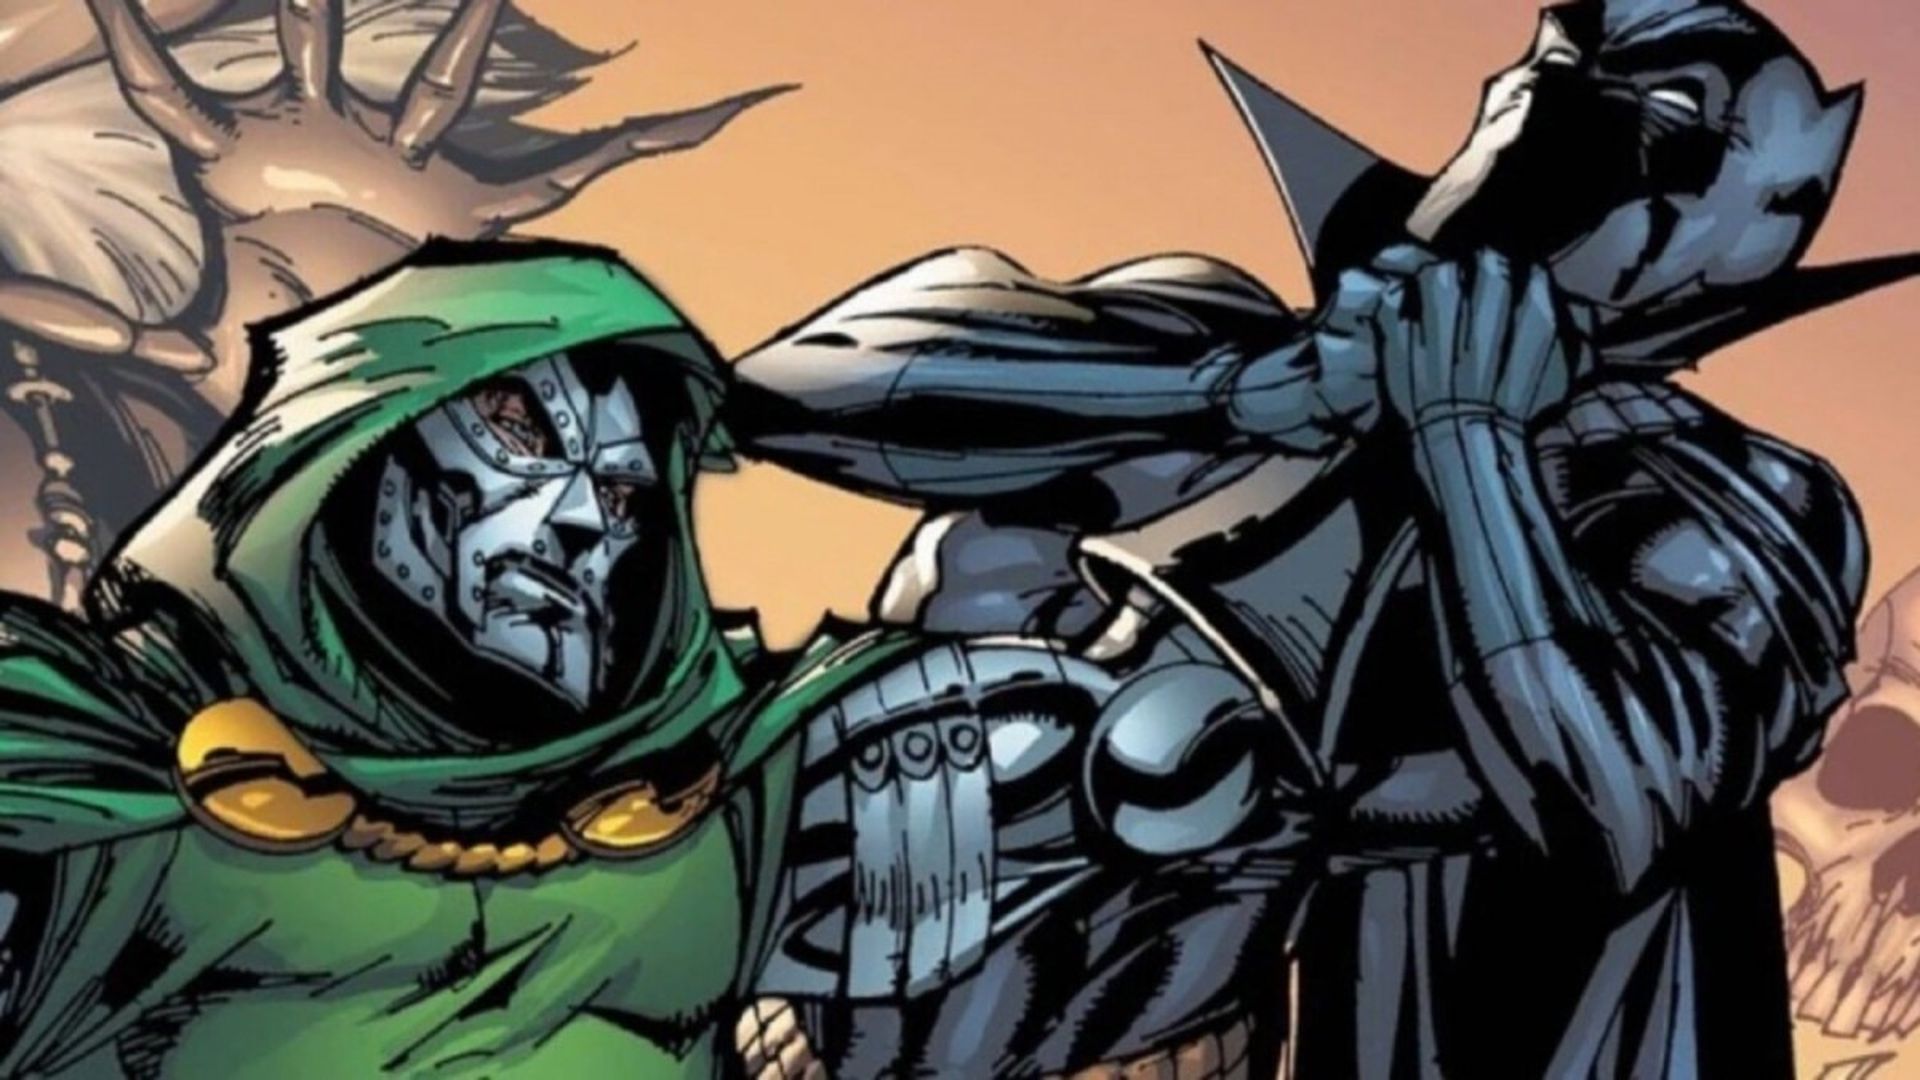 An unexpected source, radio broadcaster Howard Stern, may have revealed information about a new Marvel movie, Doctor Doom MCU project might be on its way.